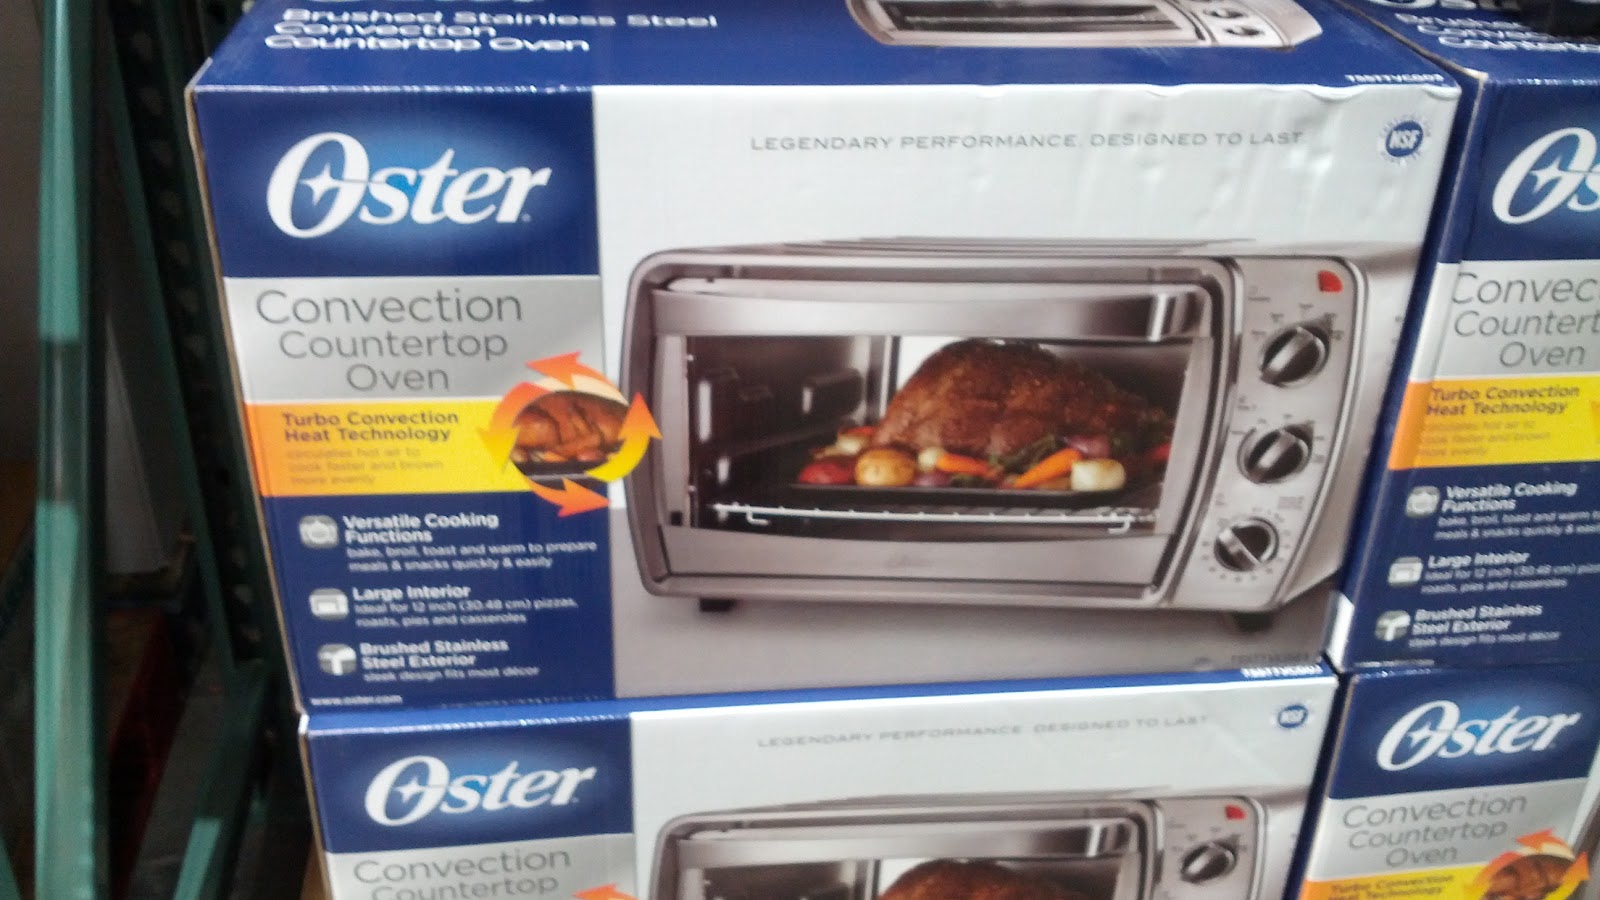 Oster Brushed Stainless Steel Convection Countertop Oven